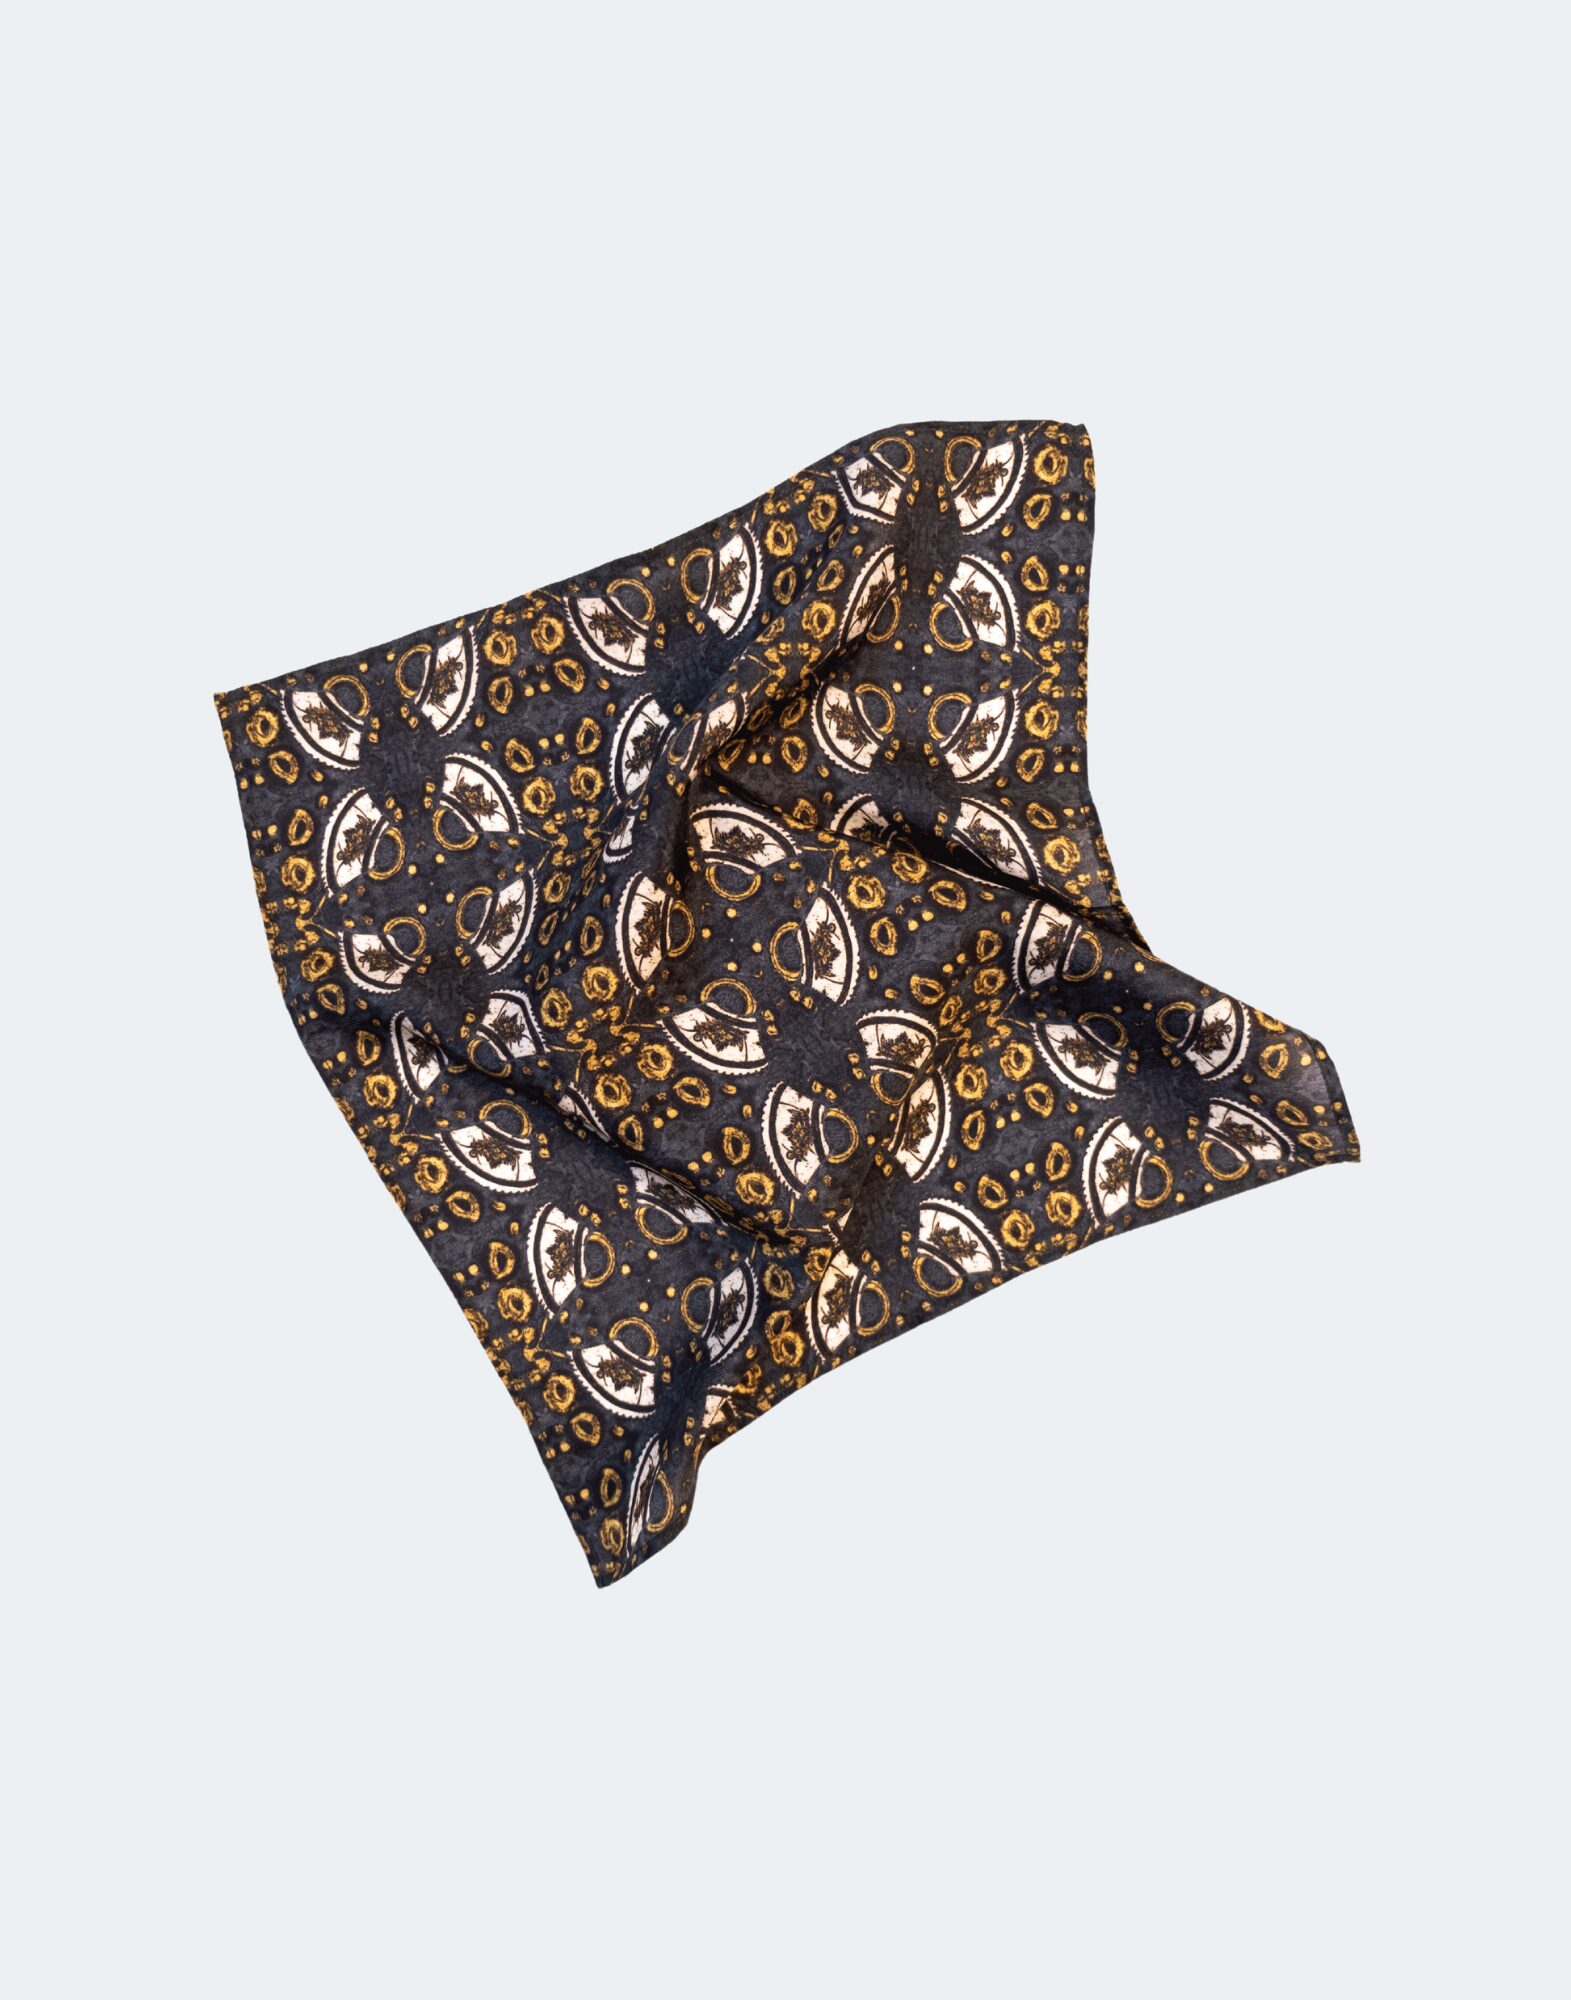 flat laid pocket square with gold and white print across a dark background